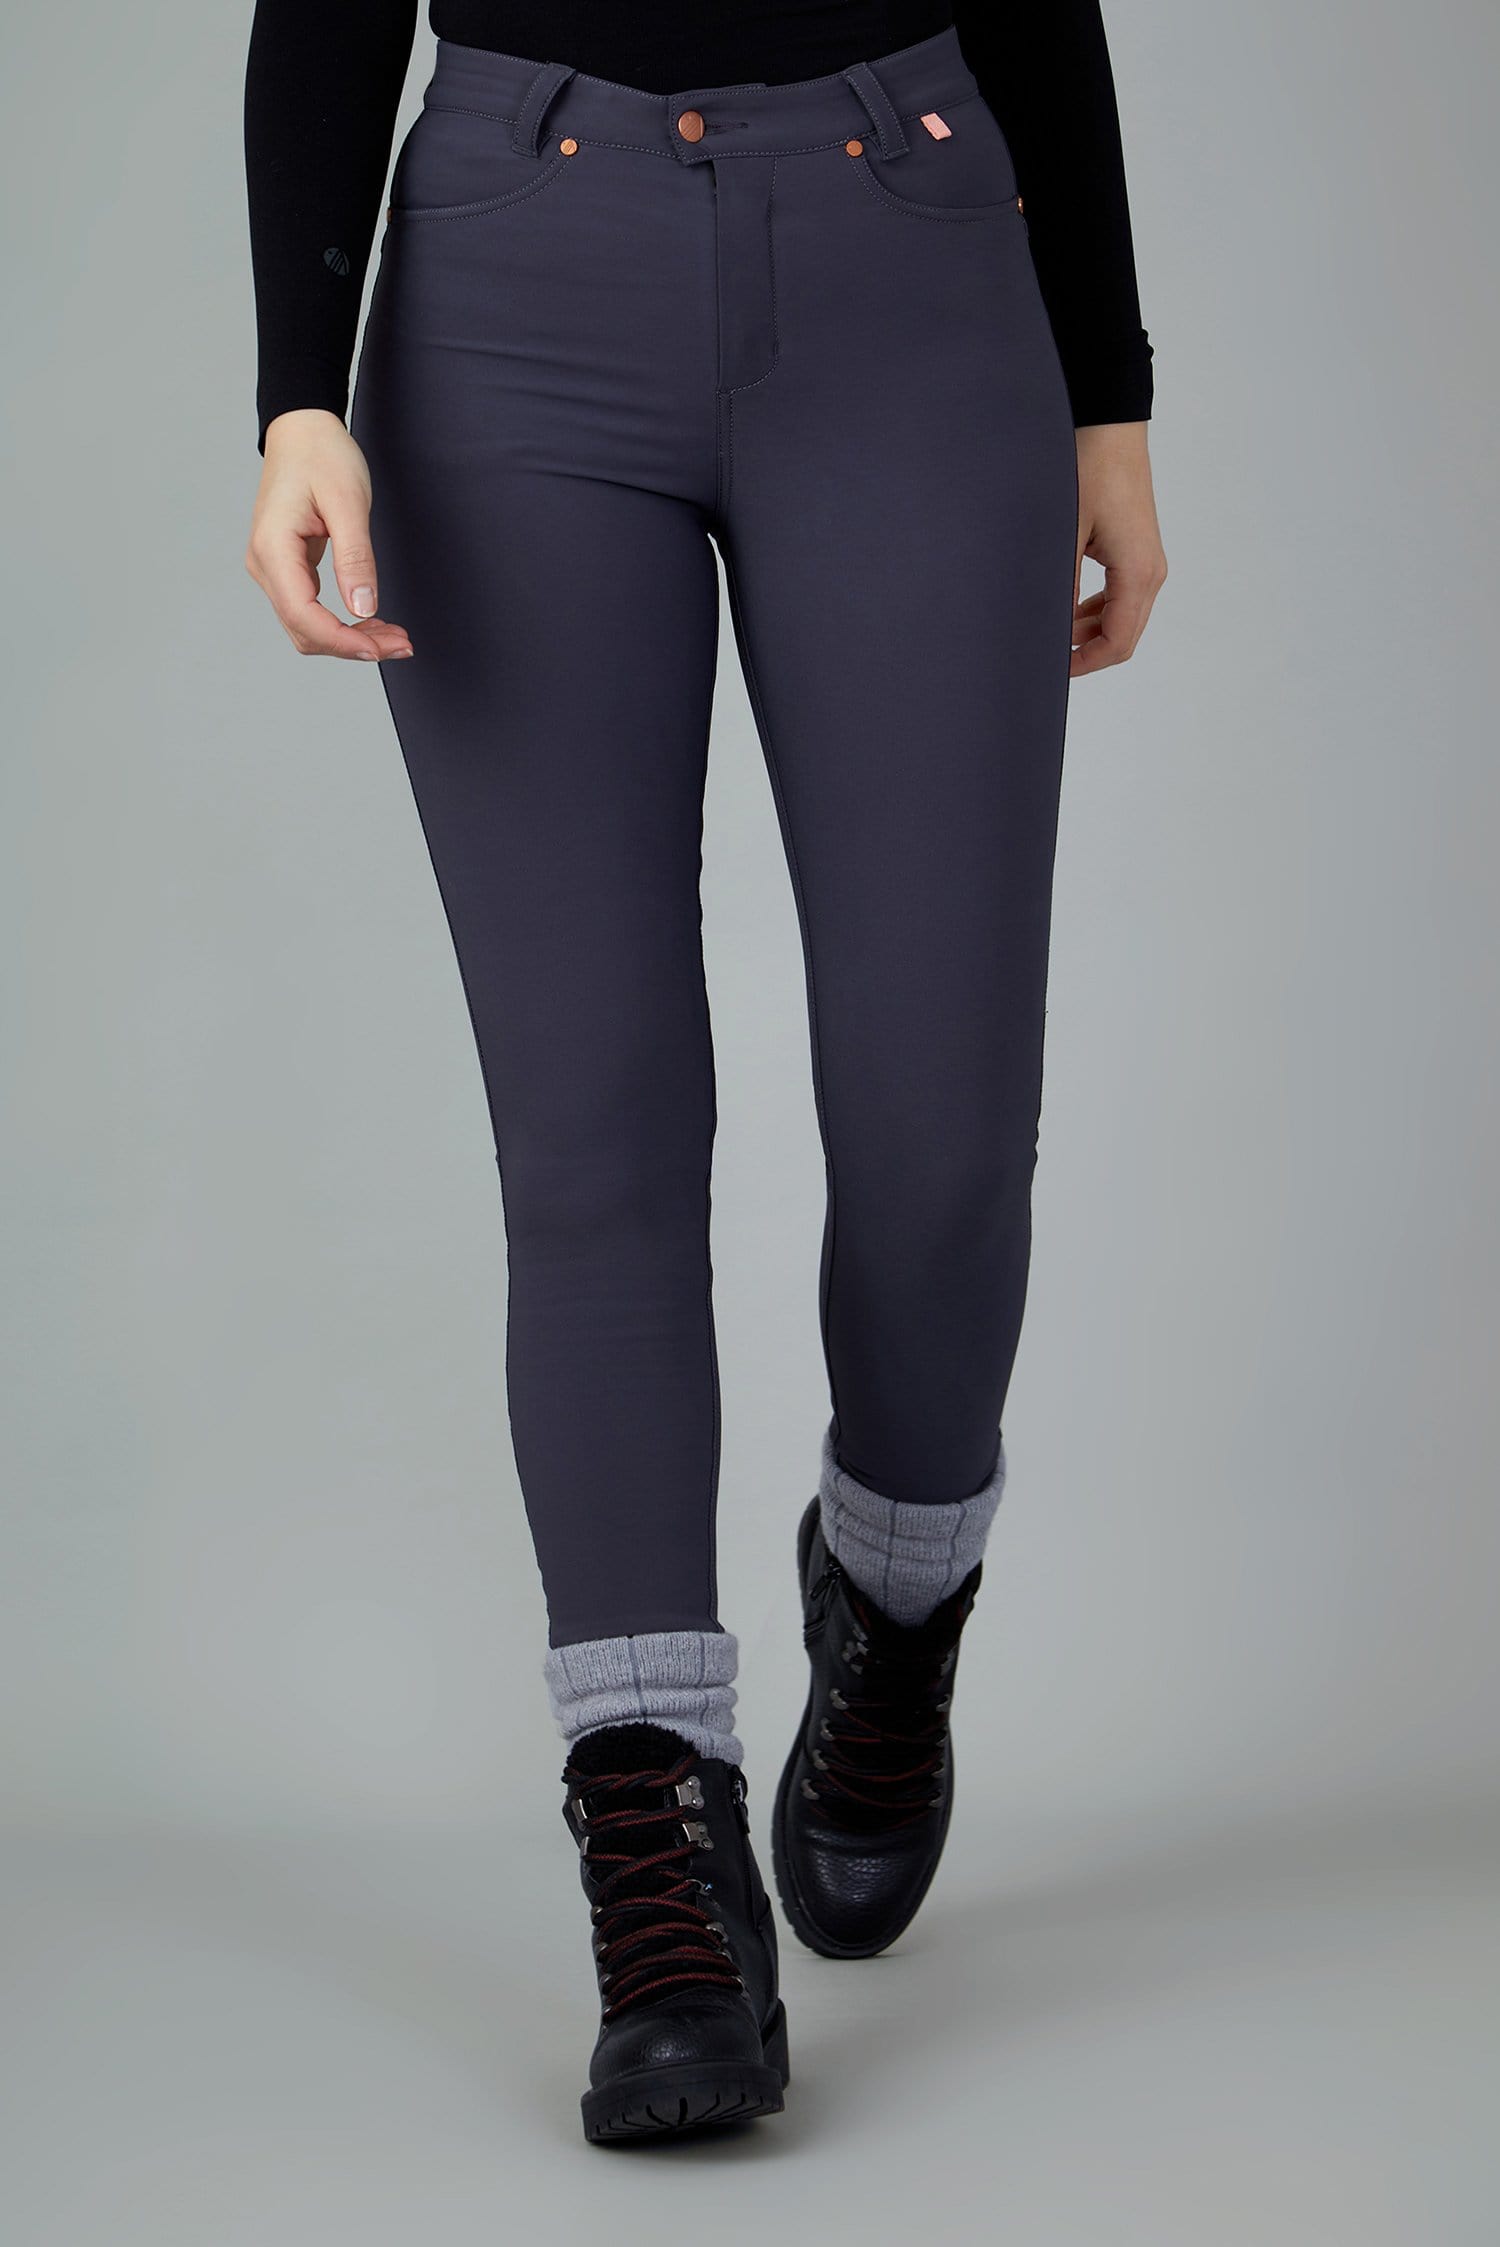 The Aventurite Stretch Skinny Outdoor Trousers - Obsidian - 24p / Uk6 - Womens - Acai Outdoorwear